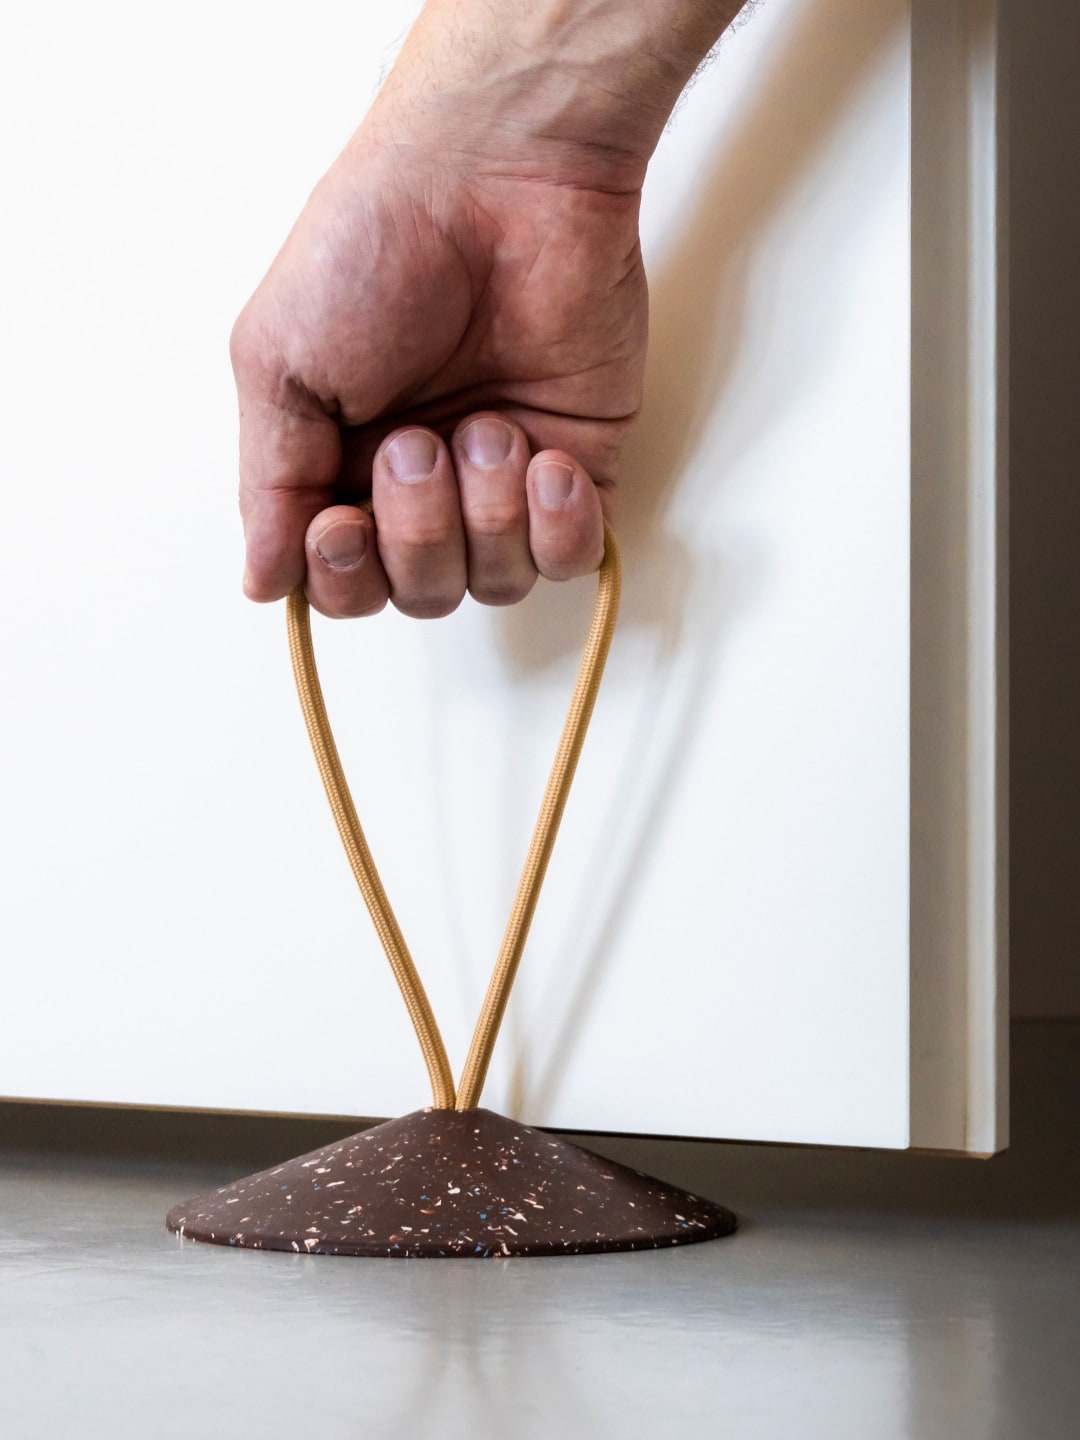 A hand is holding a piece of chocolate on a Pidät - STOP Doorstop.